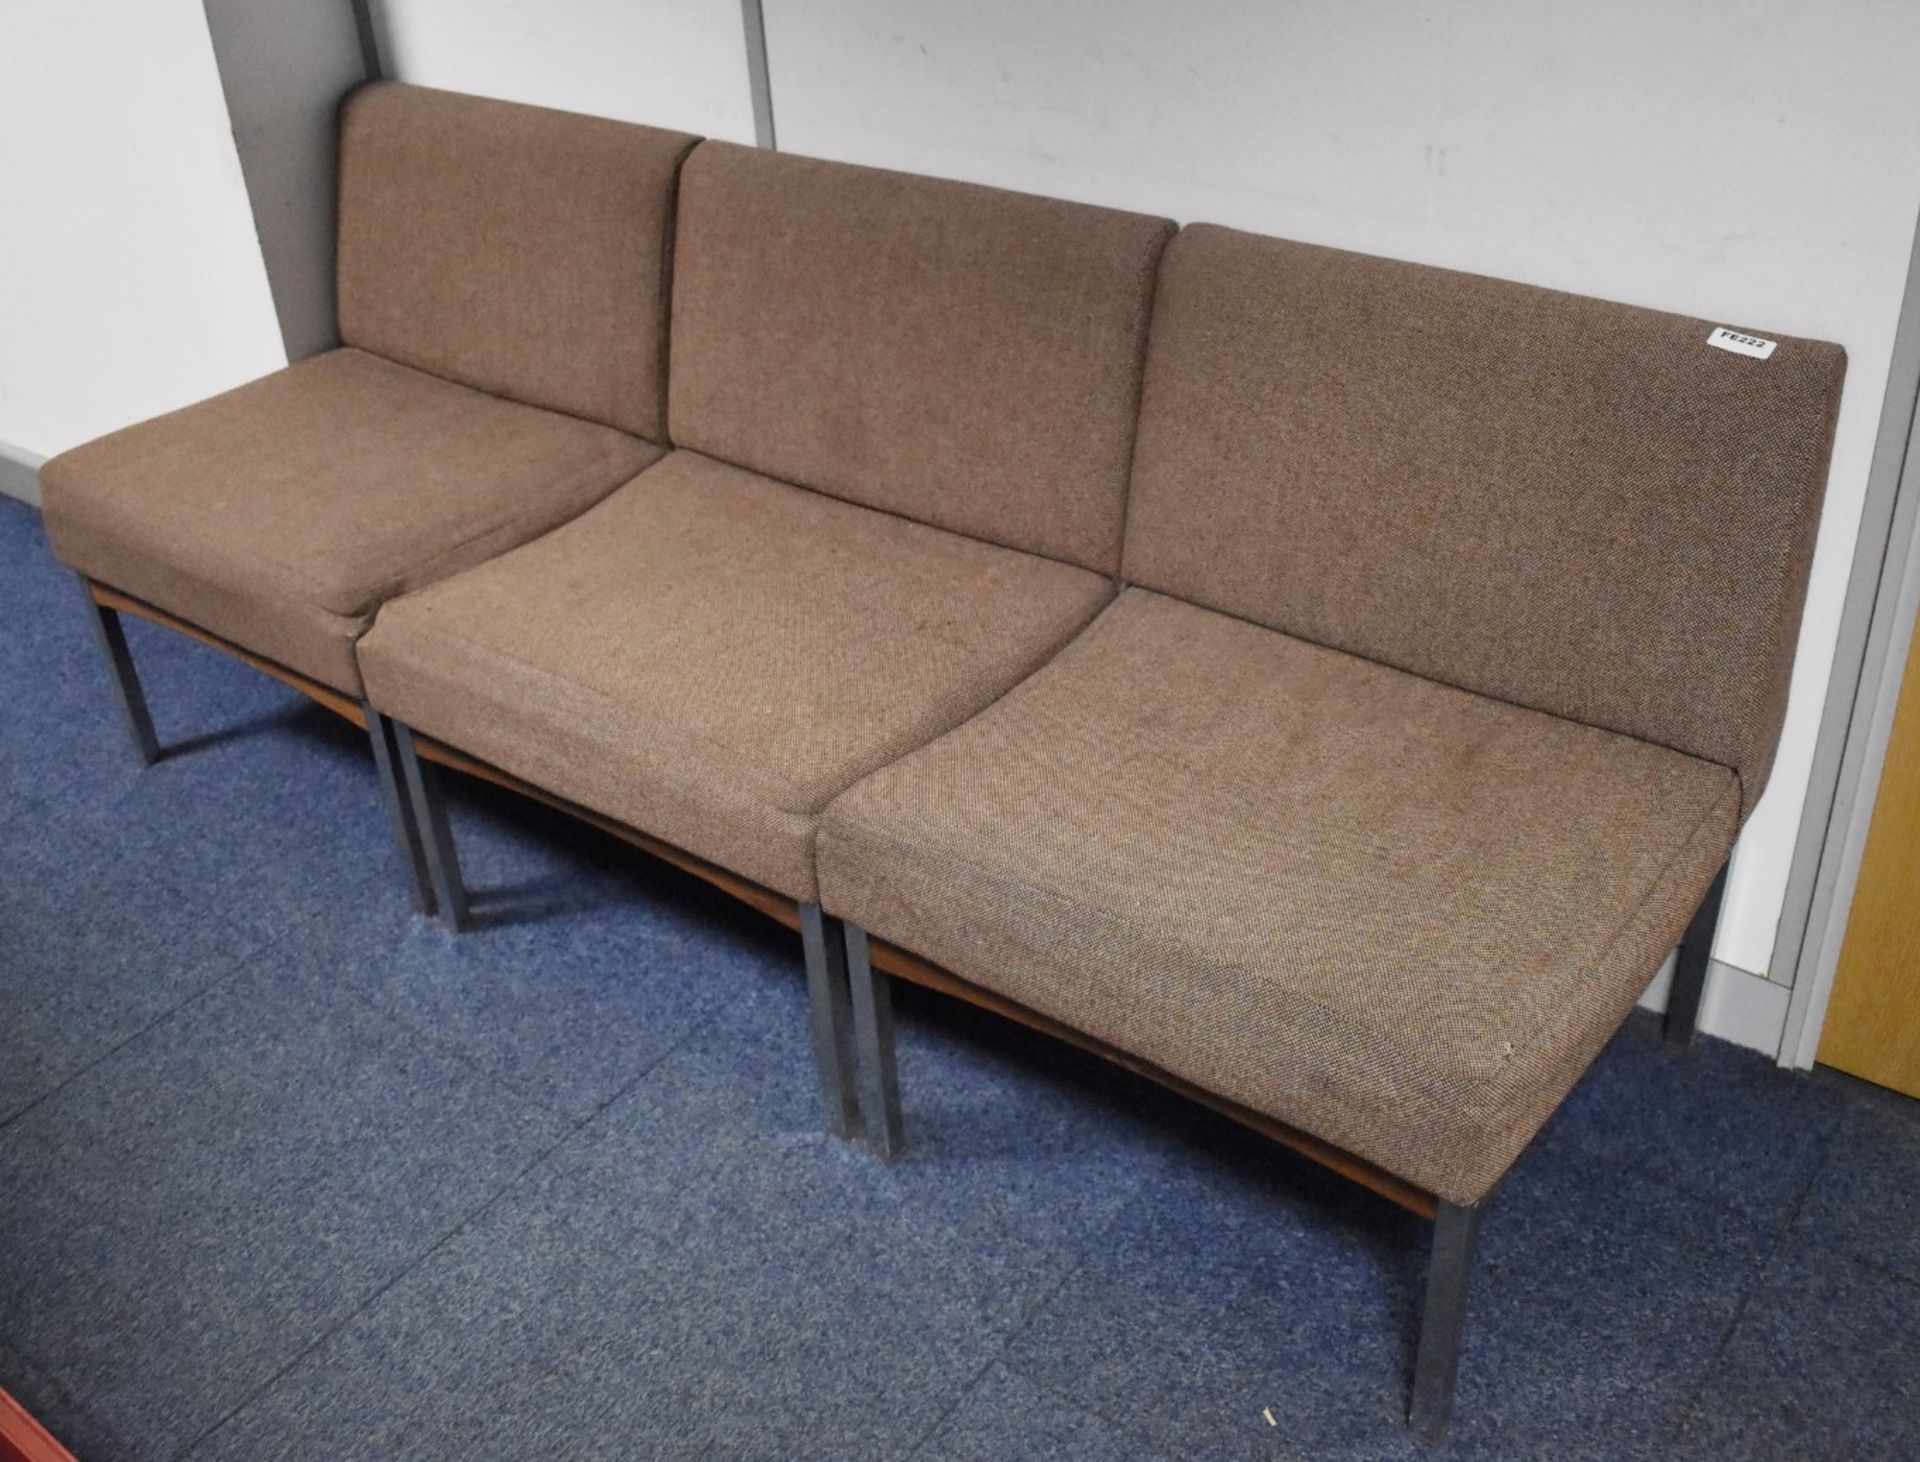 1 x Reception Waiting Room Seating Bench - Width 180cms - Comes in Three Sections - Ref FE222